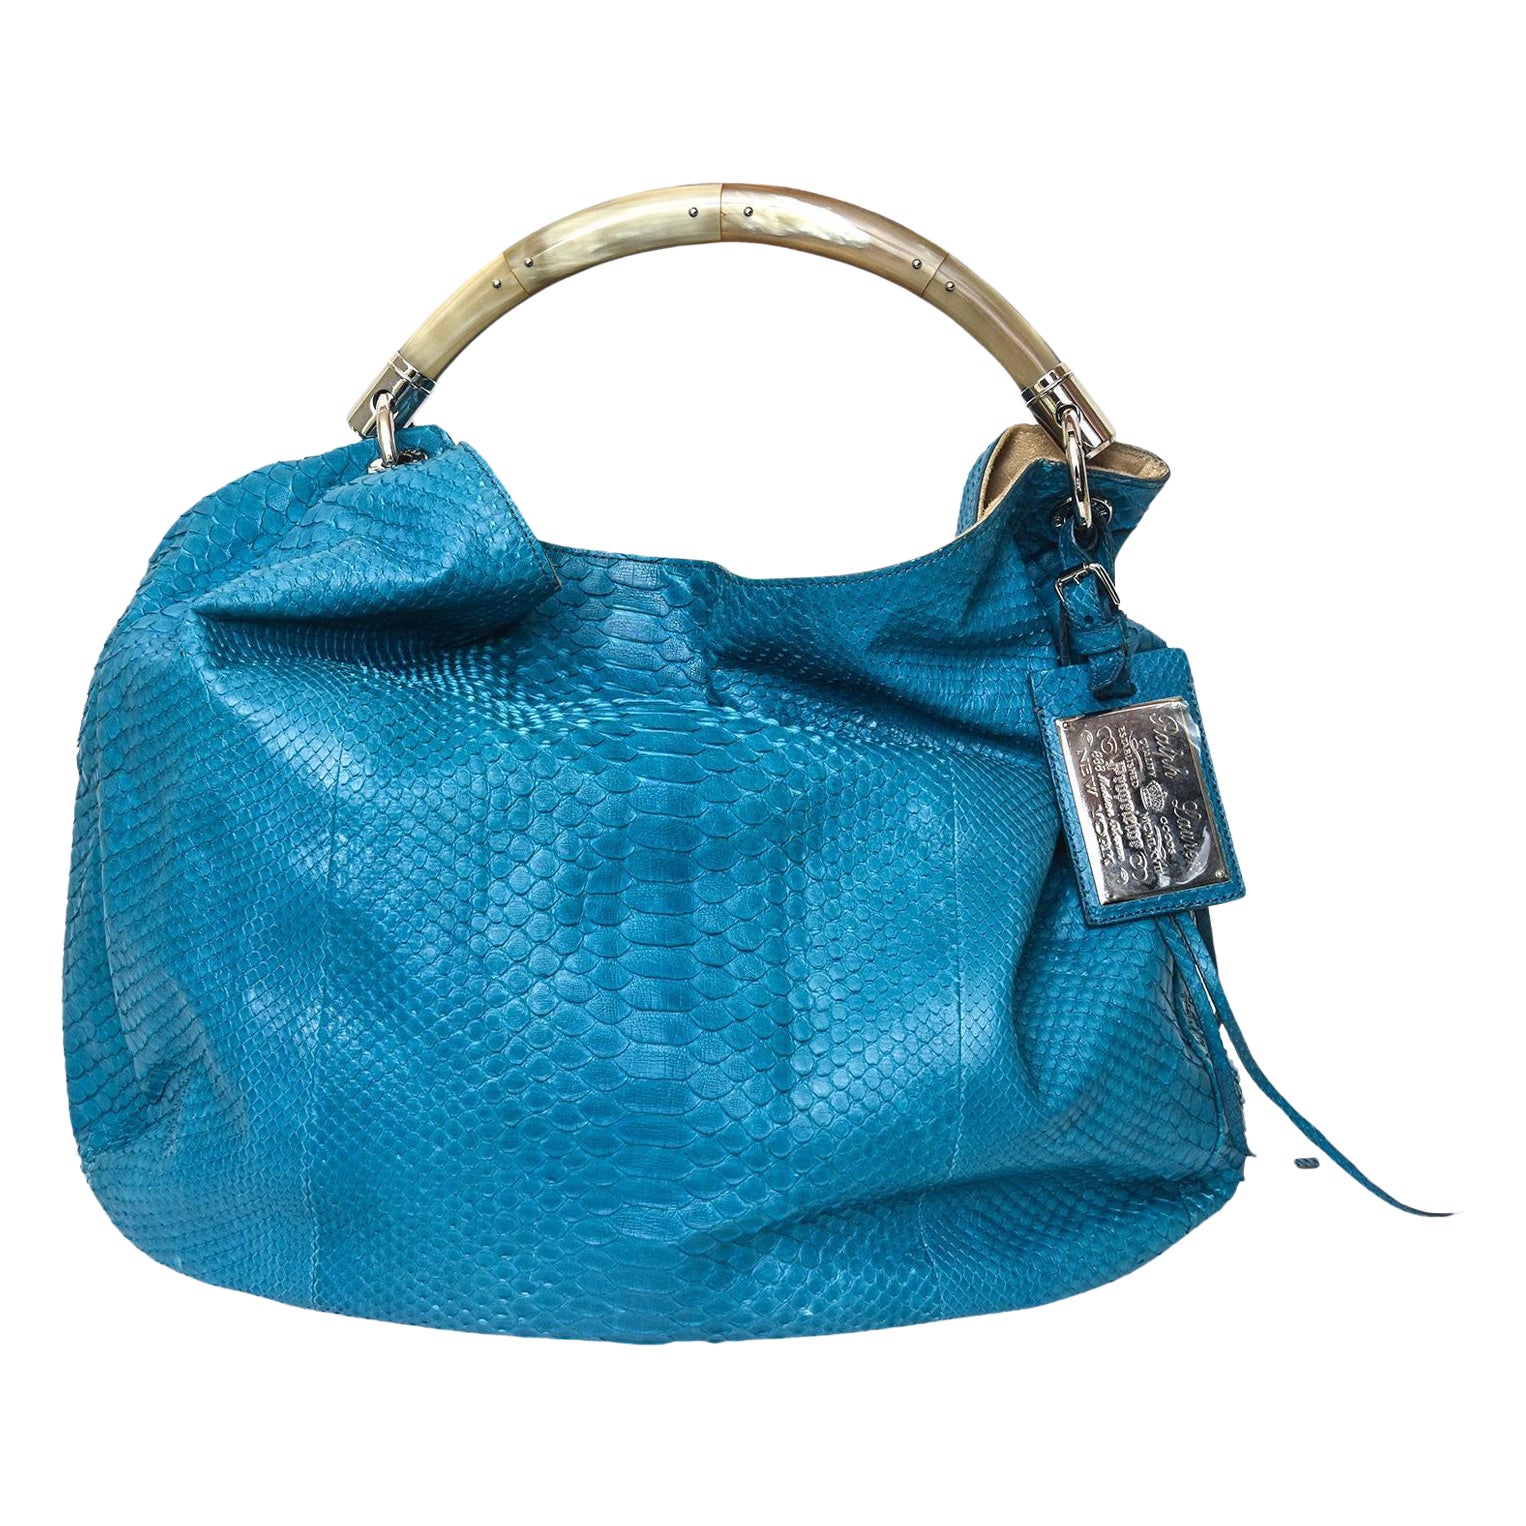 Ralph Lauren Turquoise Python Arm and Shoulder Bag With Bone LIke Top Handle For Sale